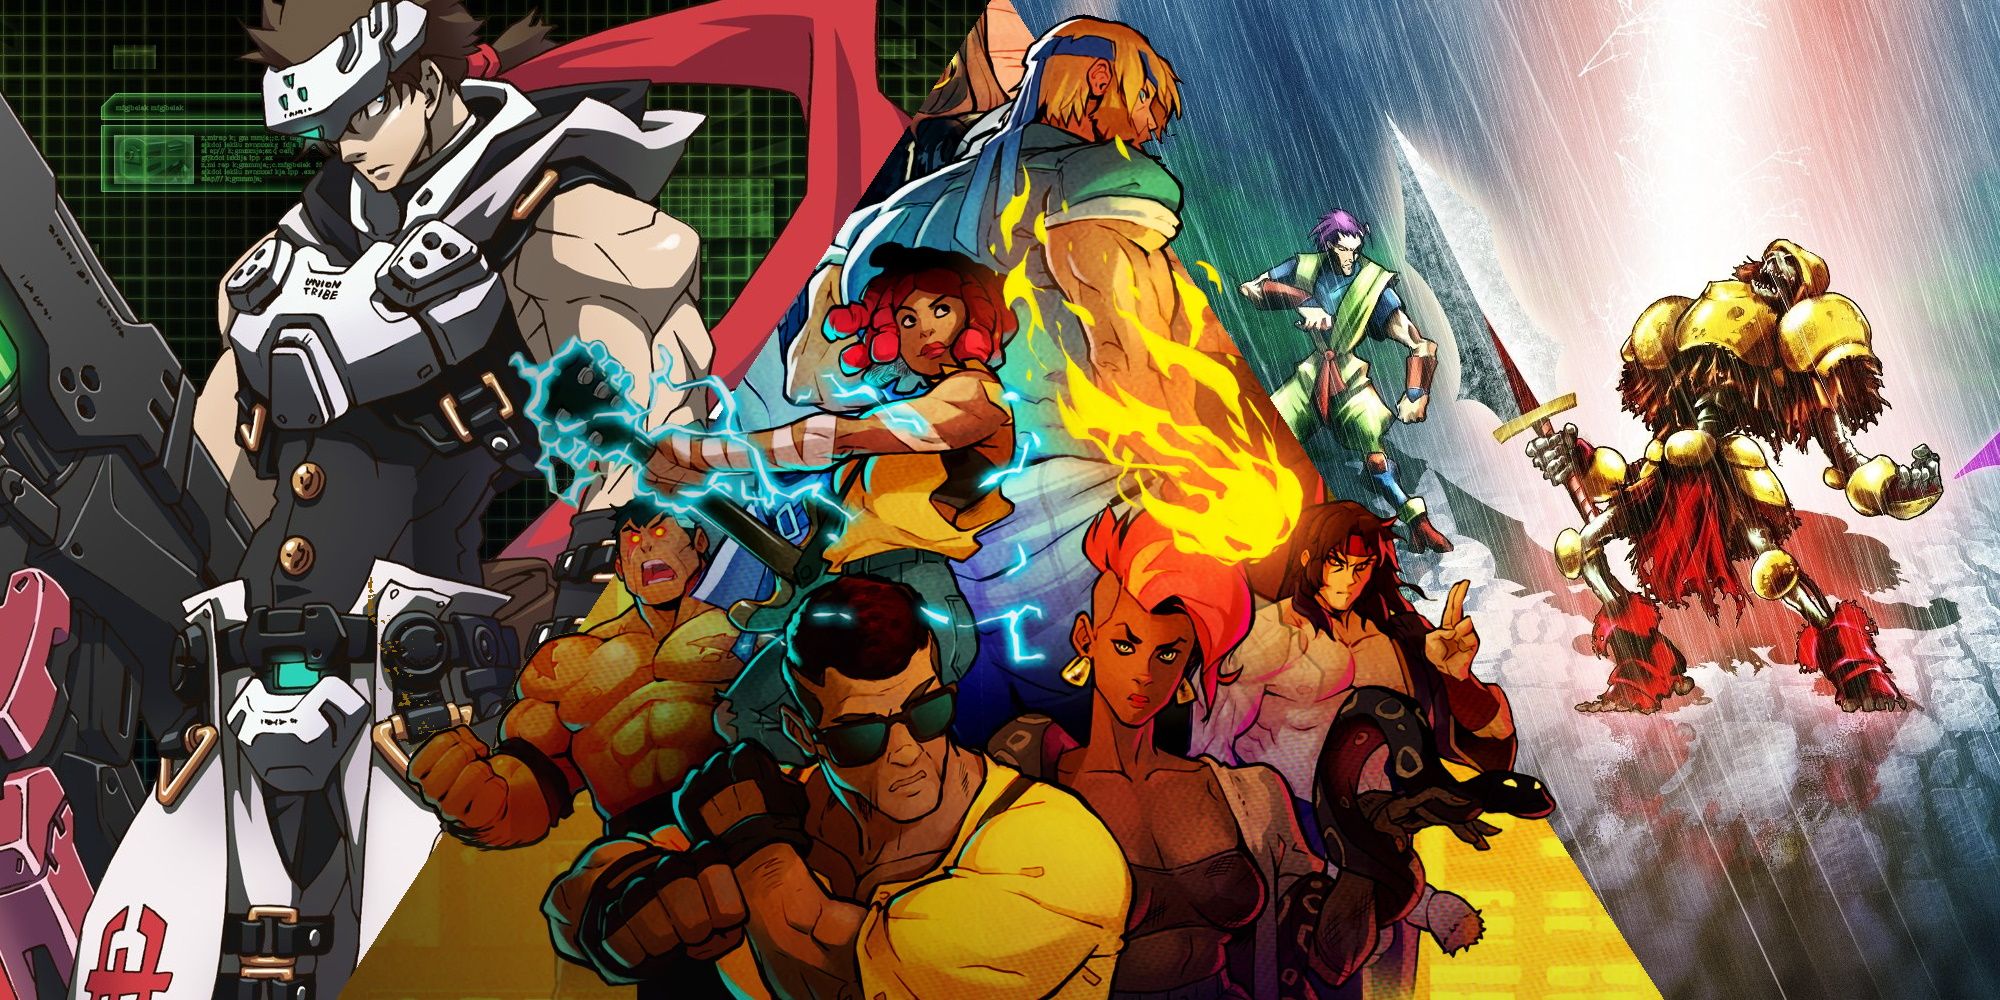 2D Games With Online Featured Image (featuring Streets Of Rage 4, Guardian Heroes, and Hard Corps Uprising) 